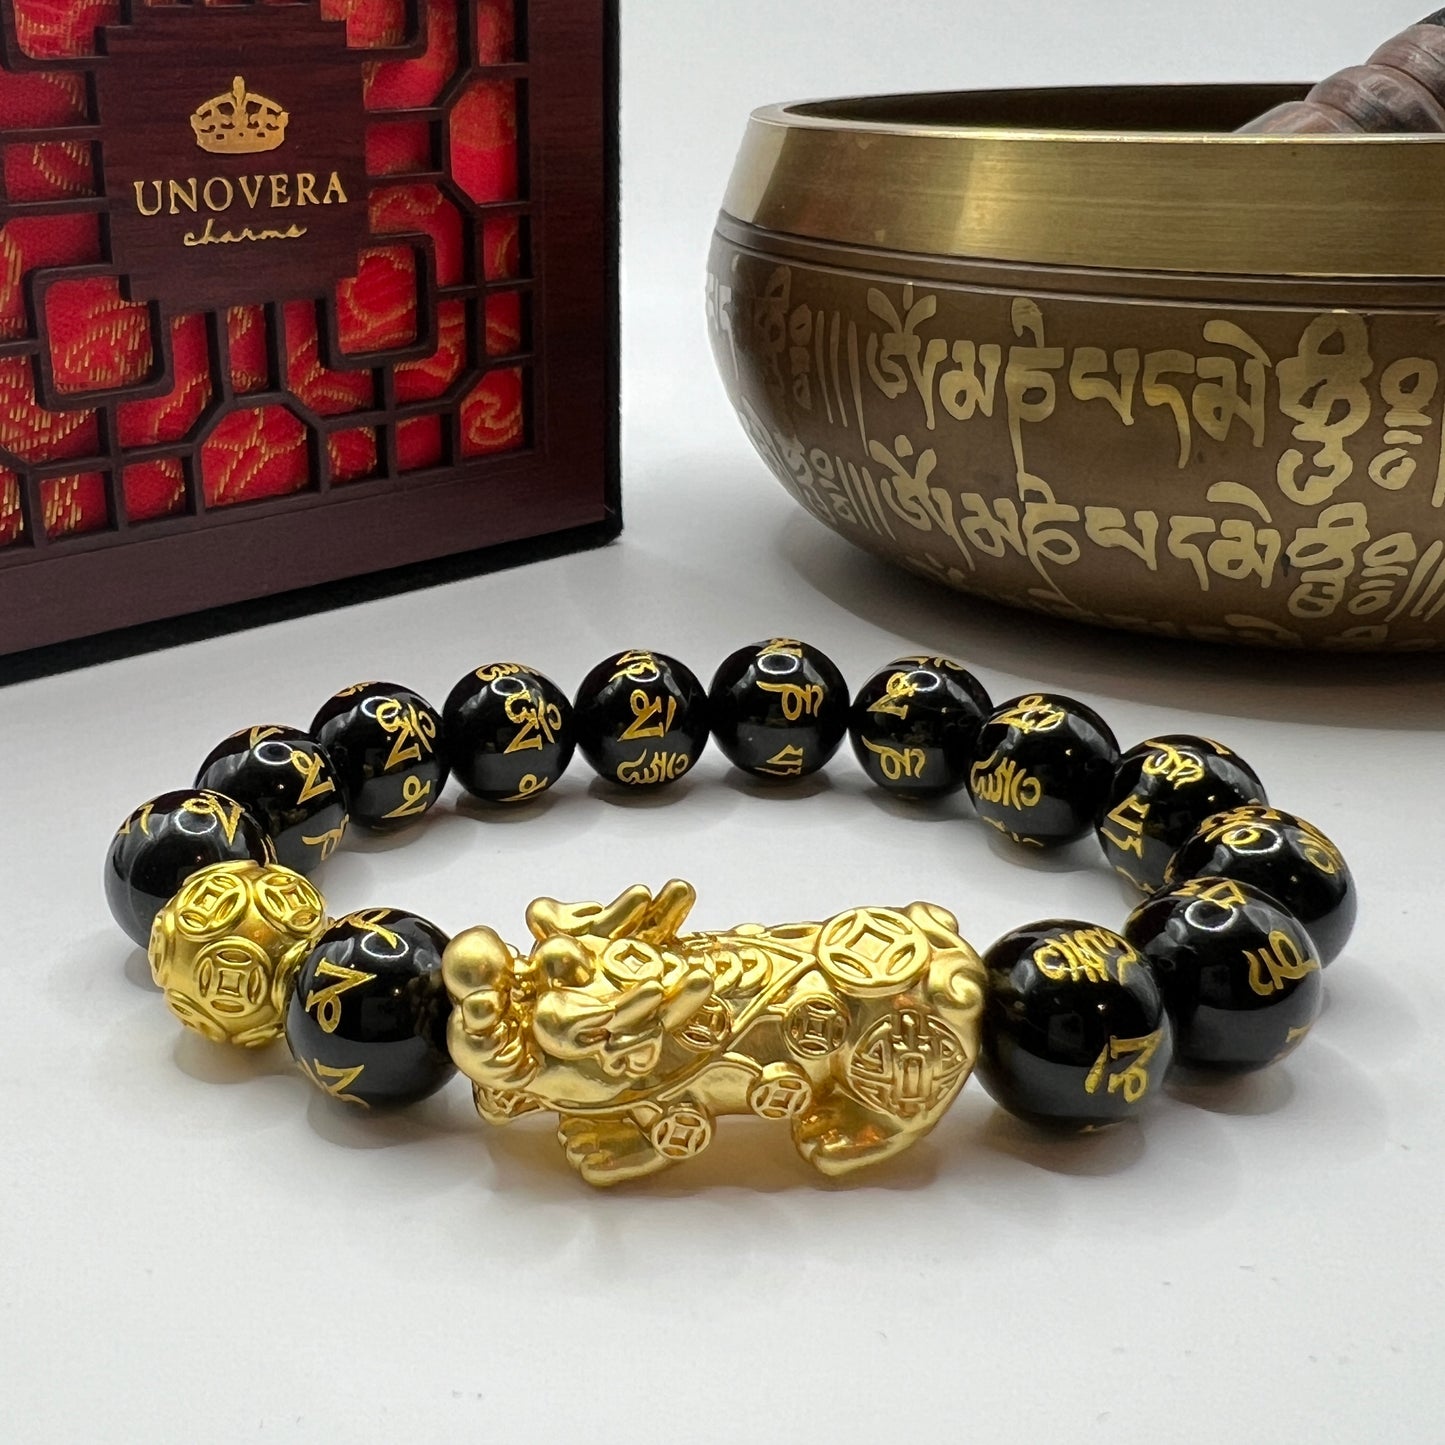 12mm Black Onyx Mantra with 24 Karat Gold Lucky PiYao and Money Ball for Abundance and Money Catcher